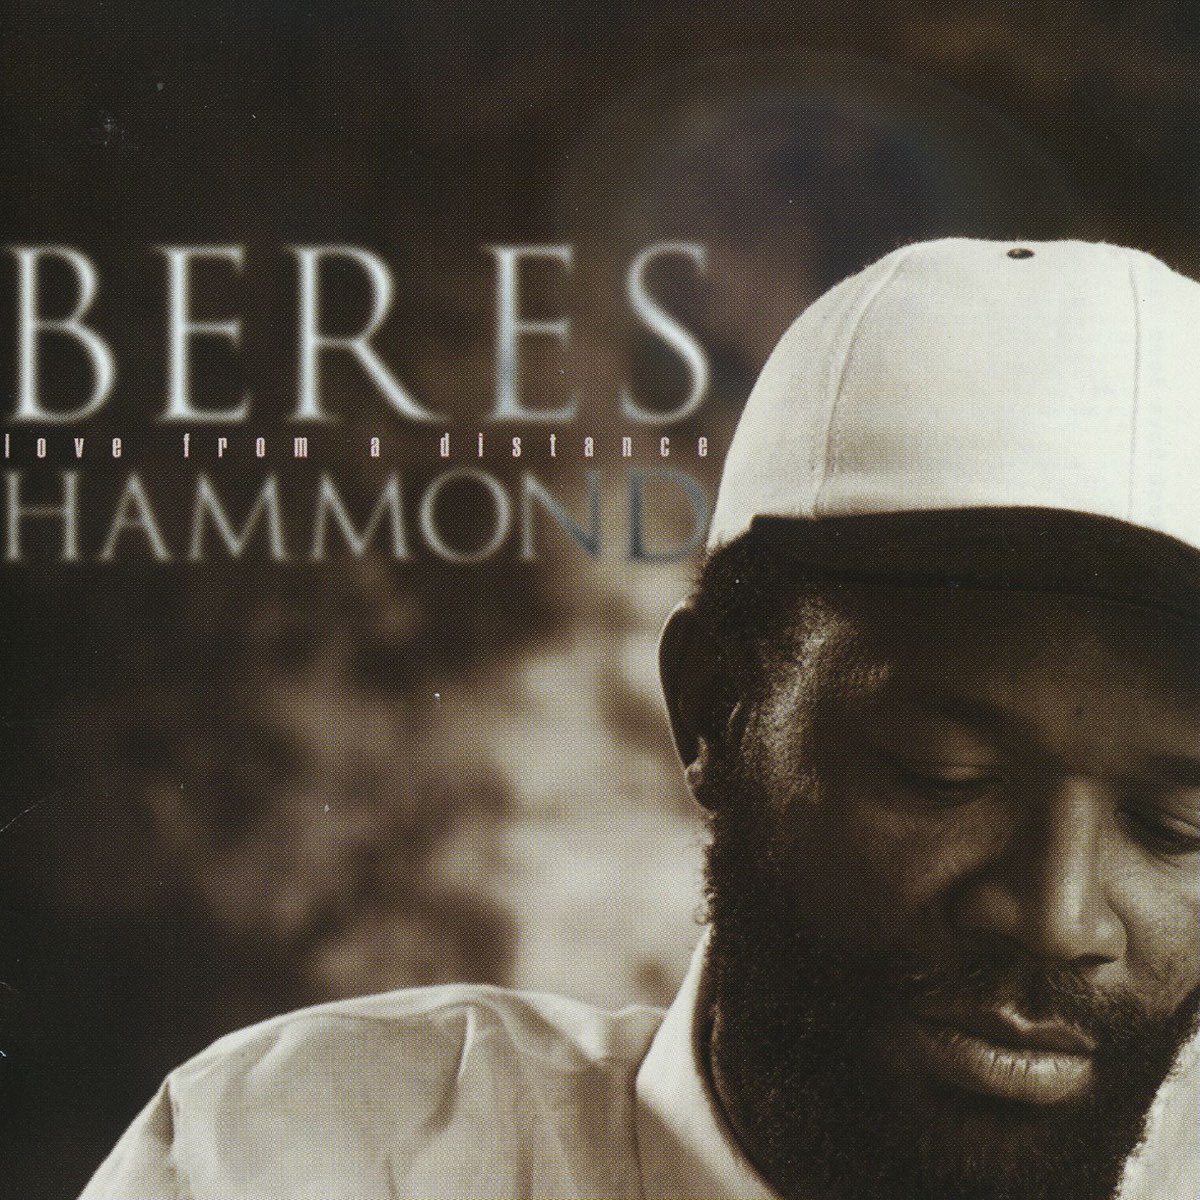 Love from a Distance ل- Beres Hammond.